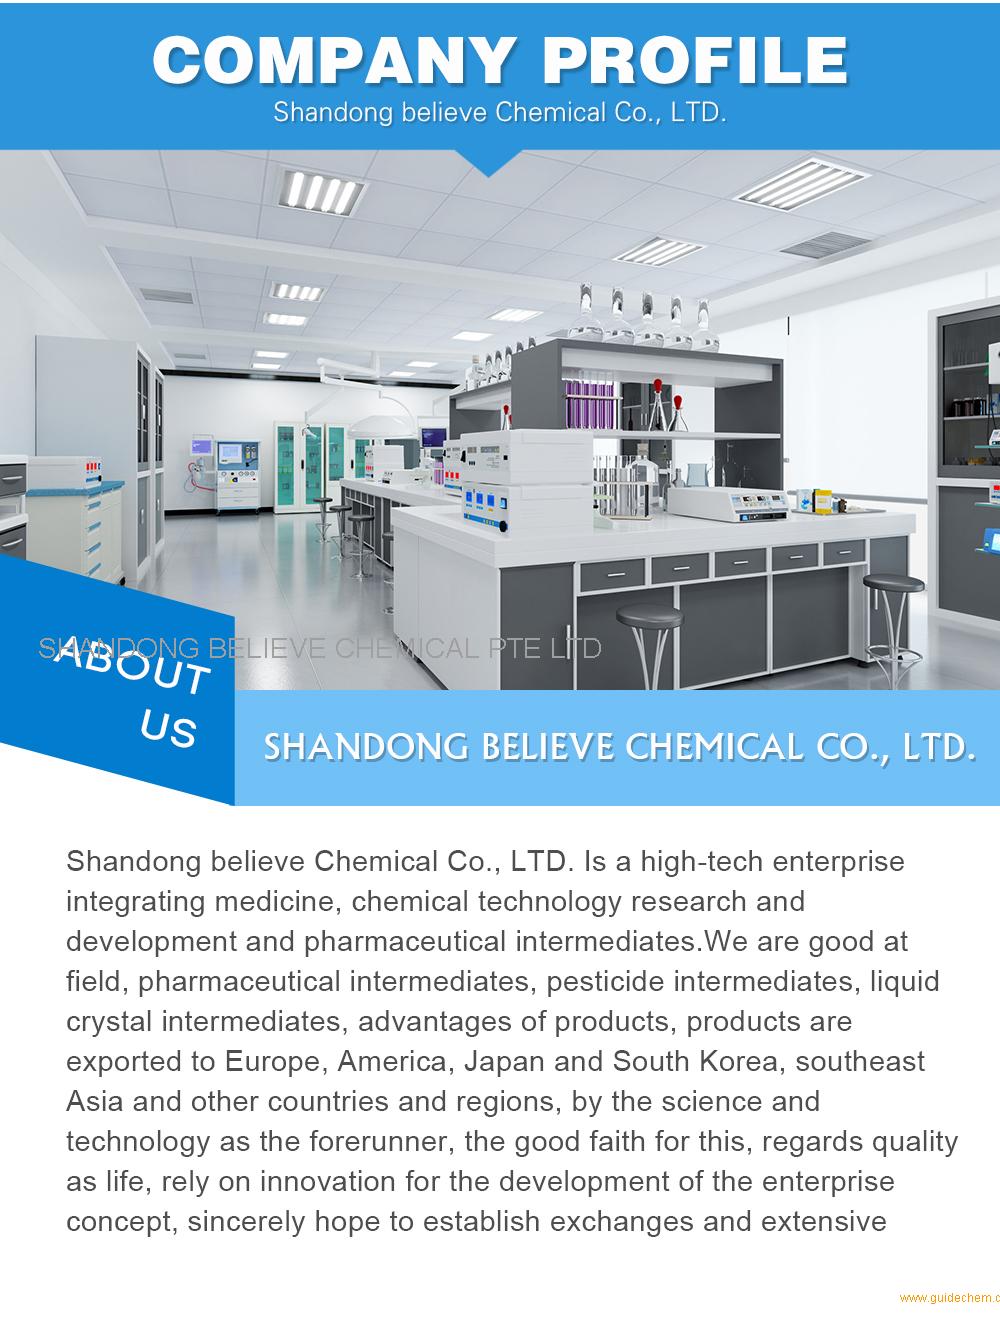 SHANDONG BELIEVE CHEMICAL PTE LTD